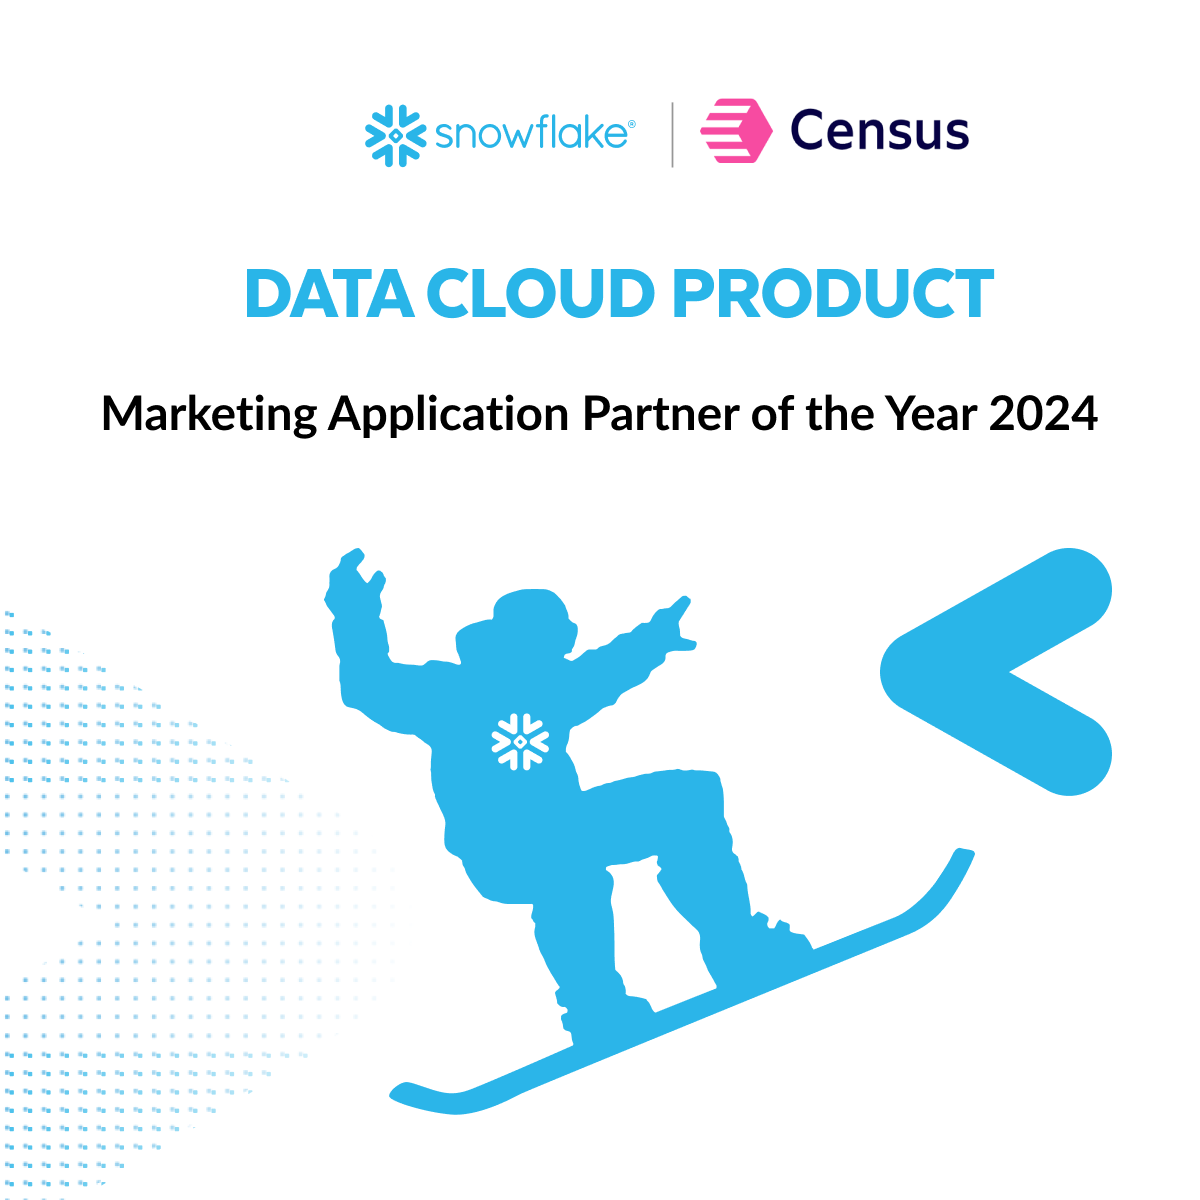 Census Snowflake Partner of the Year